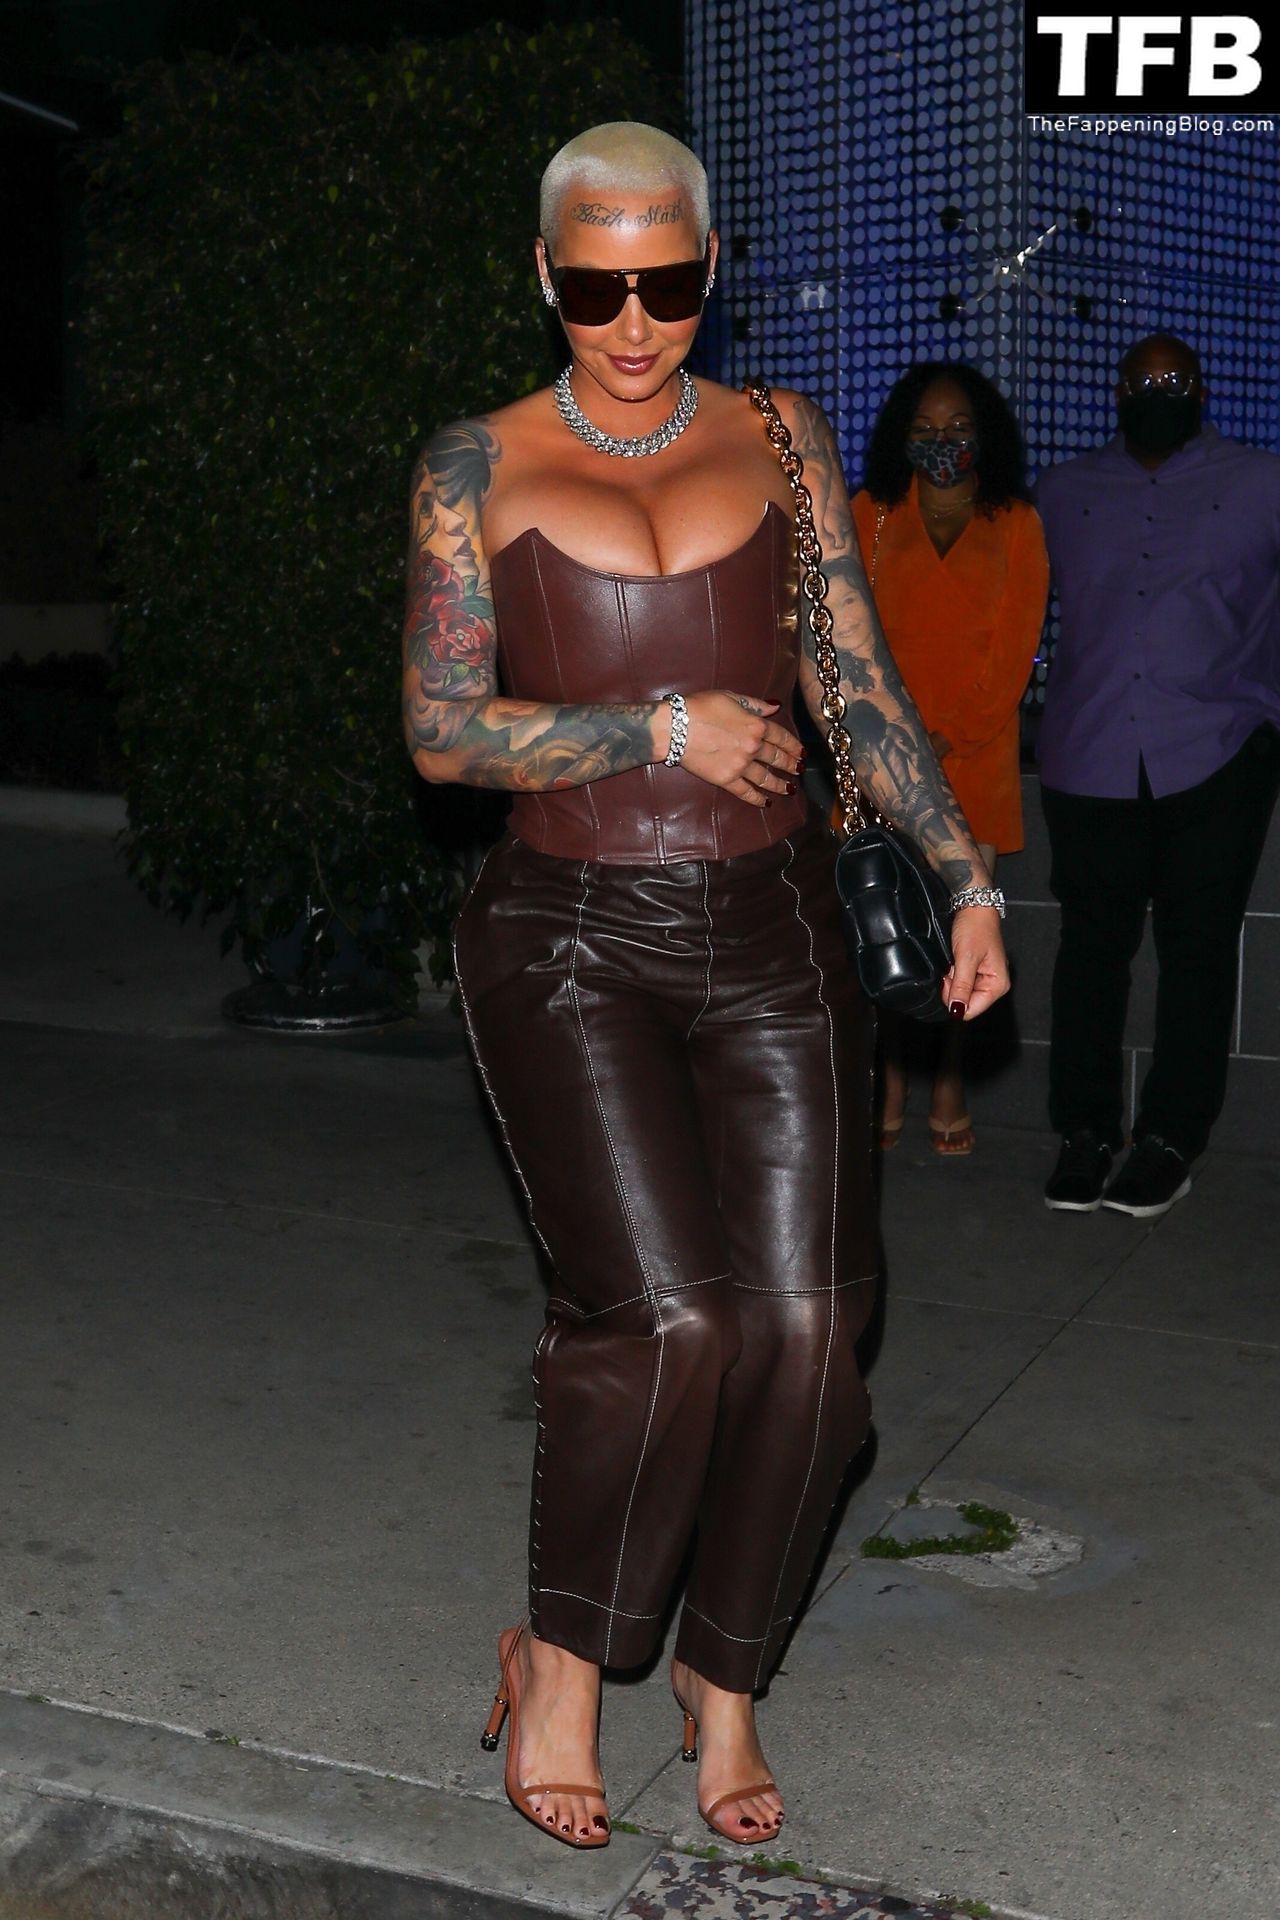 Amber-Rose-Sexy-The-Fappening-Blog-25.jpg